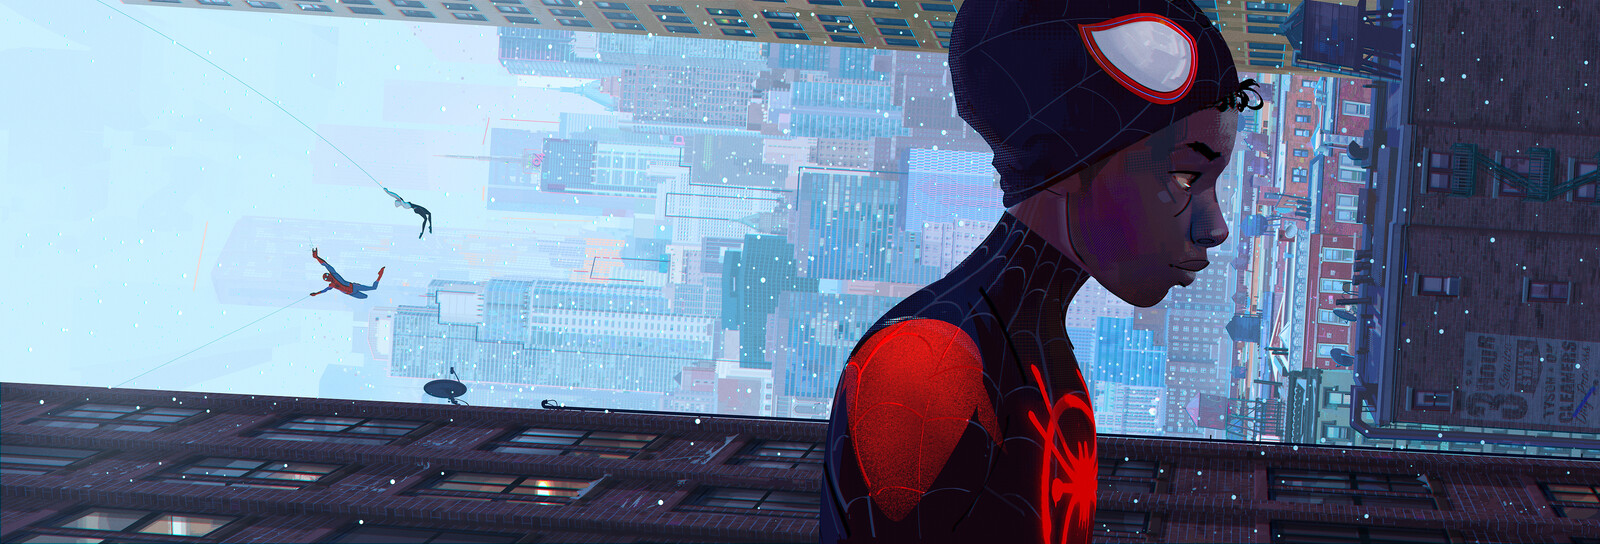 Spider-Man: Into the Spider-verse
Art of Book cover